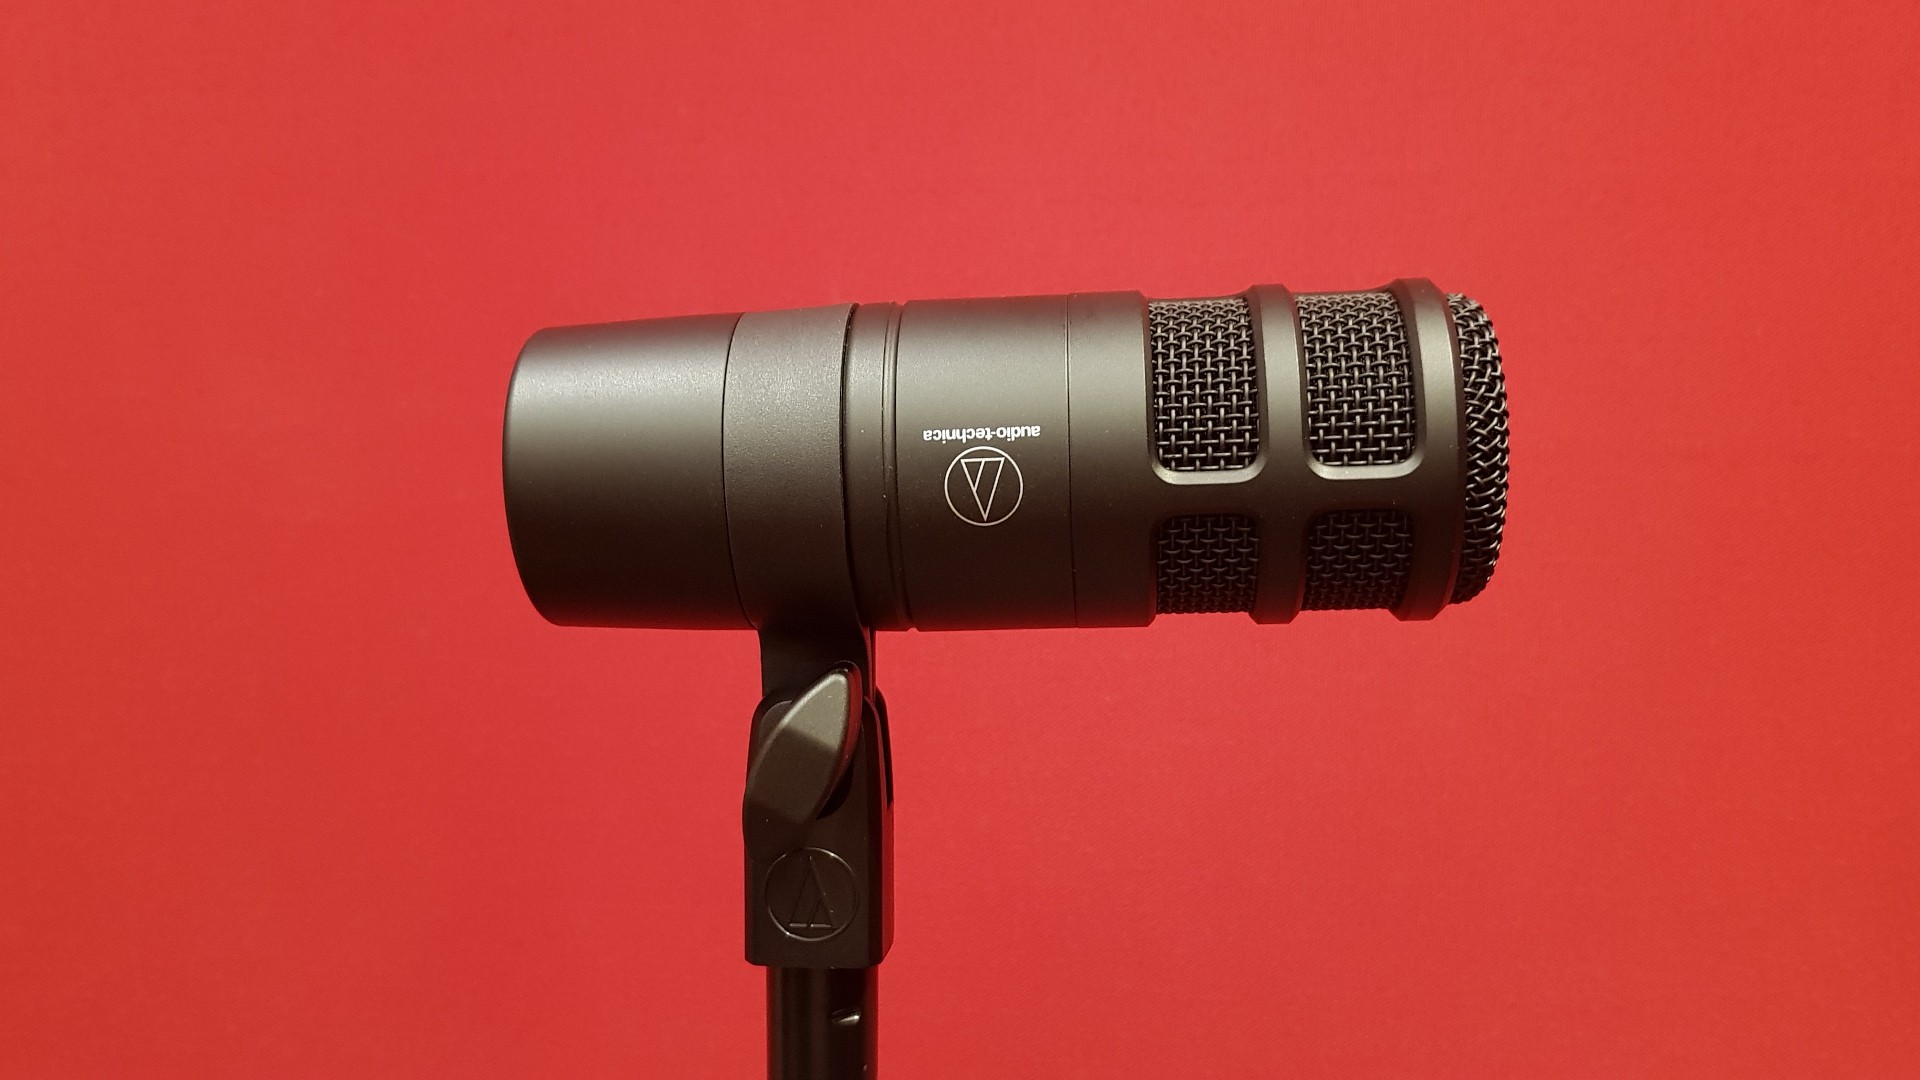 AT2040 Vs AT2020: Audio-Technica Face-Off - Which Should You Buy?